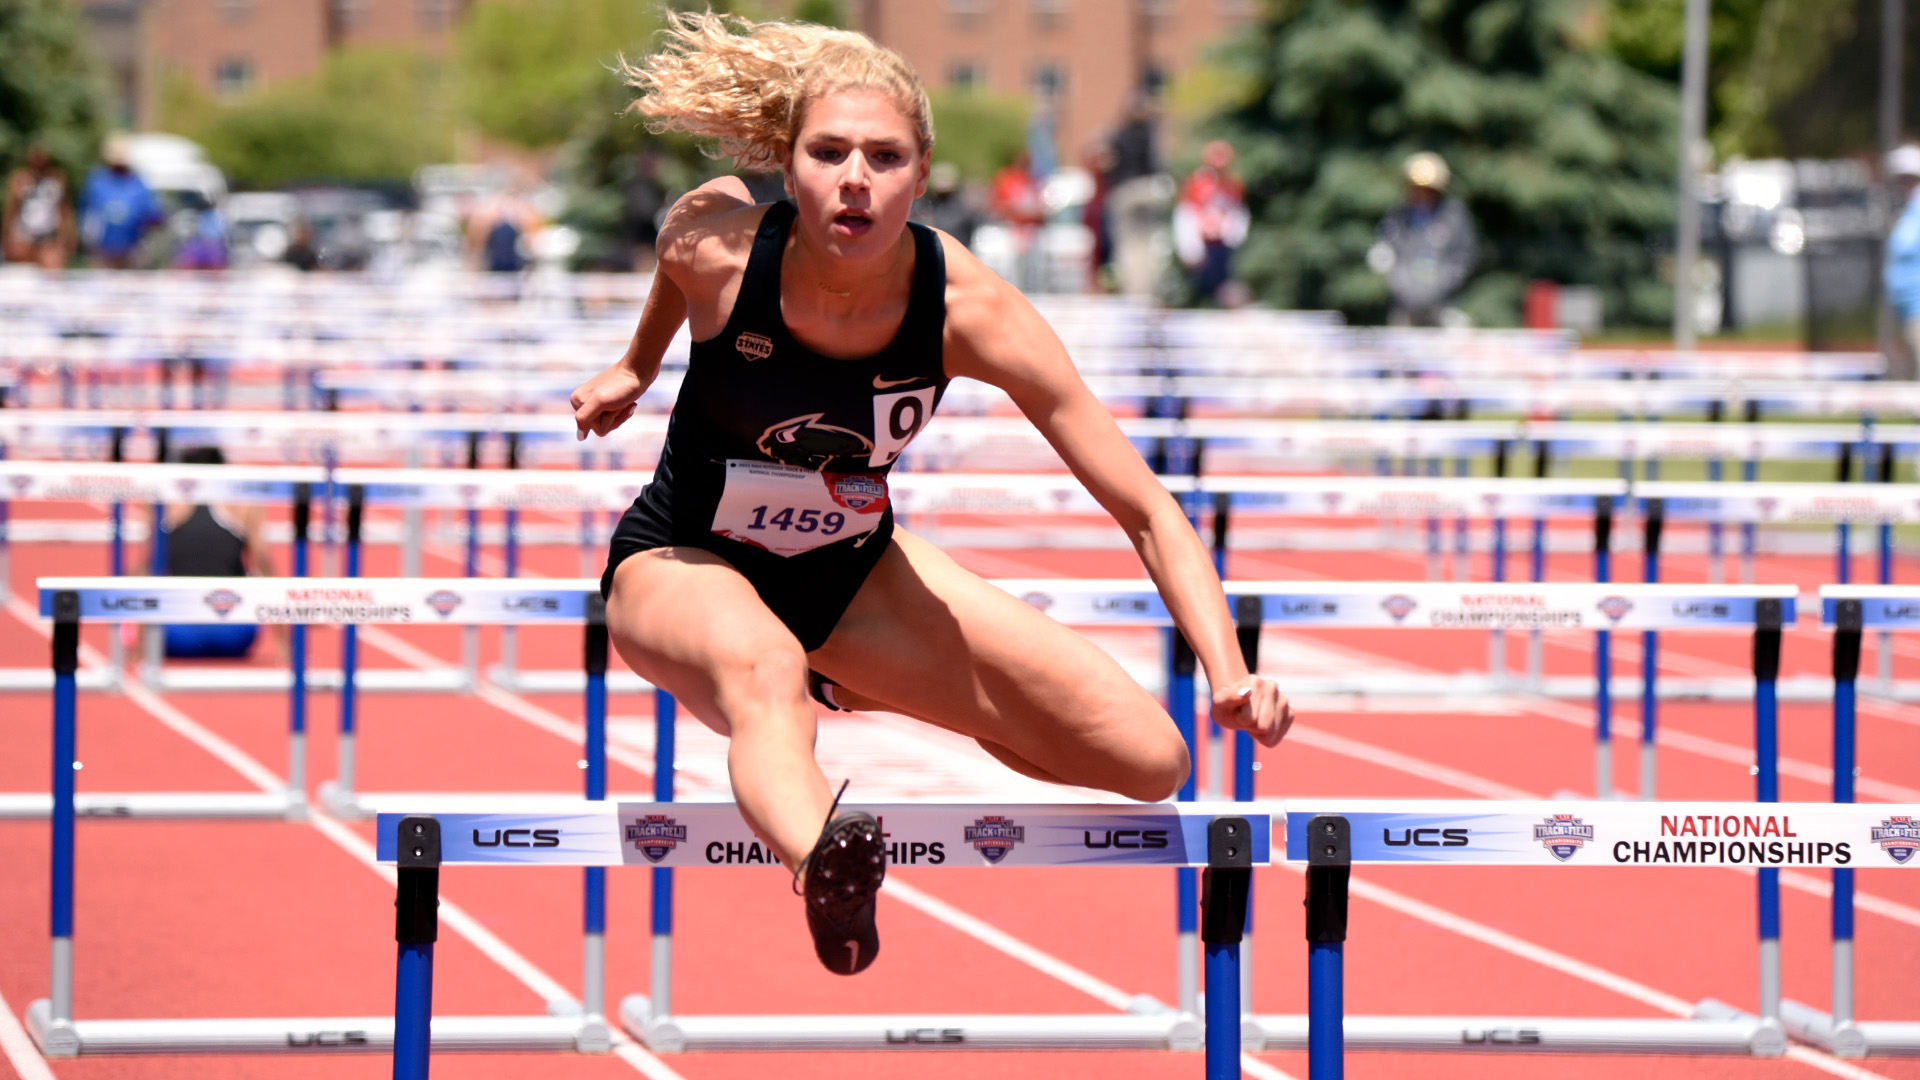 Hillen named RSC Women's Outdoor Track Athlete of the Week